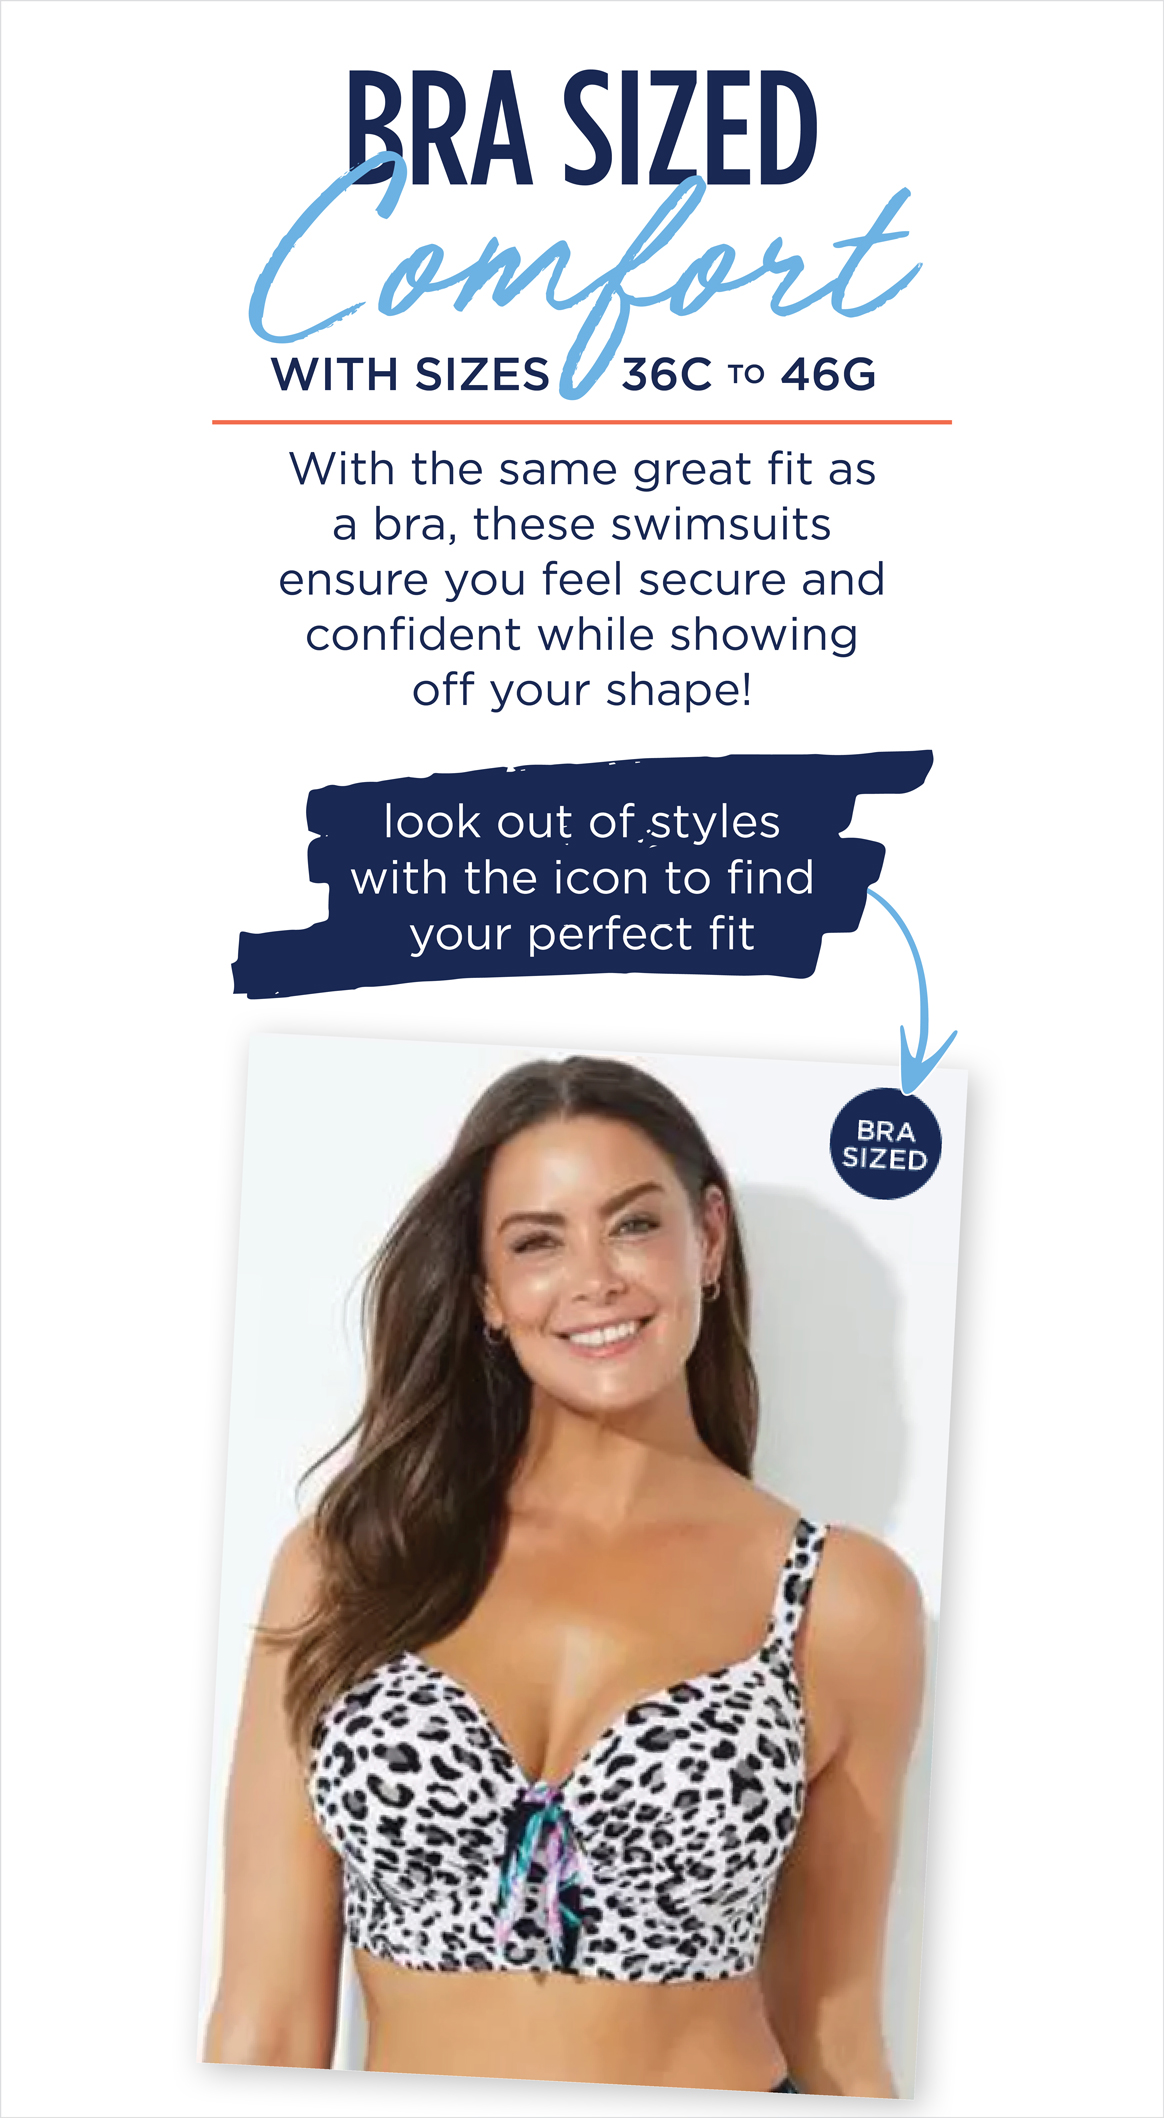 BRA SIZED COMFORT with sizes 36C to 46G - with the same great fit as a bra, these swimsuits ensure you feel secure and confident while showing off your shape